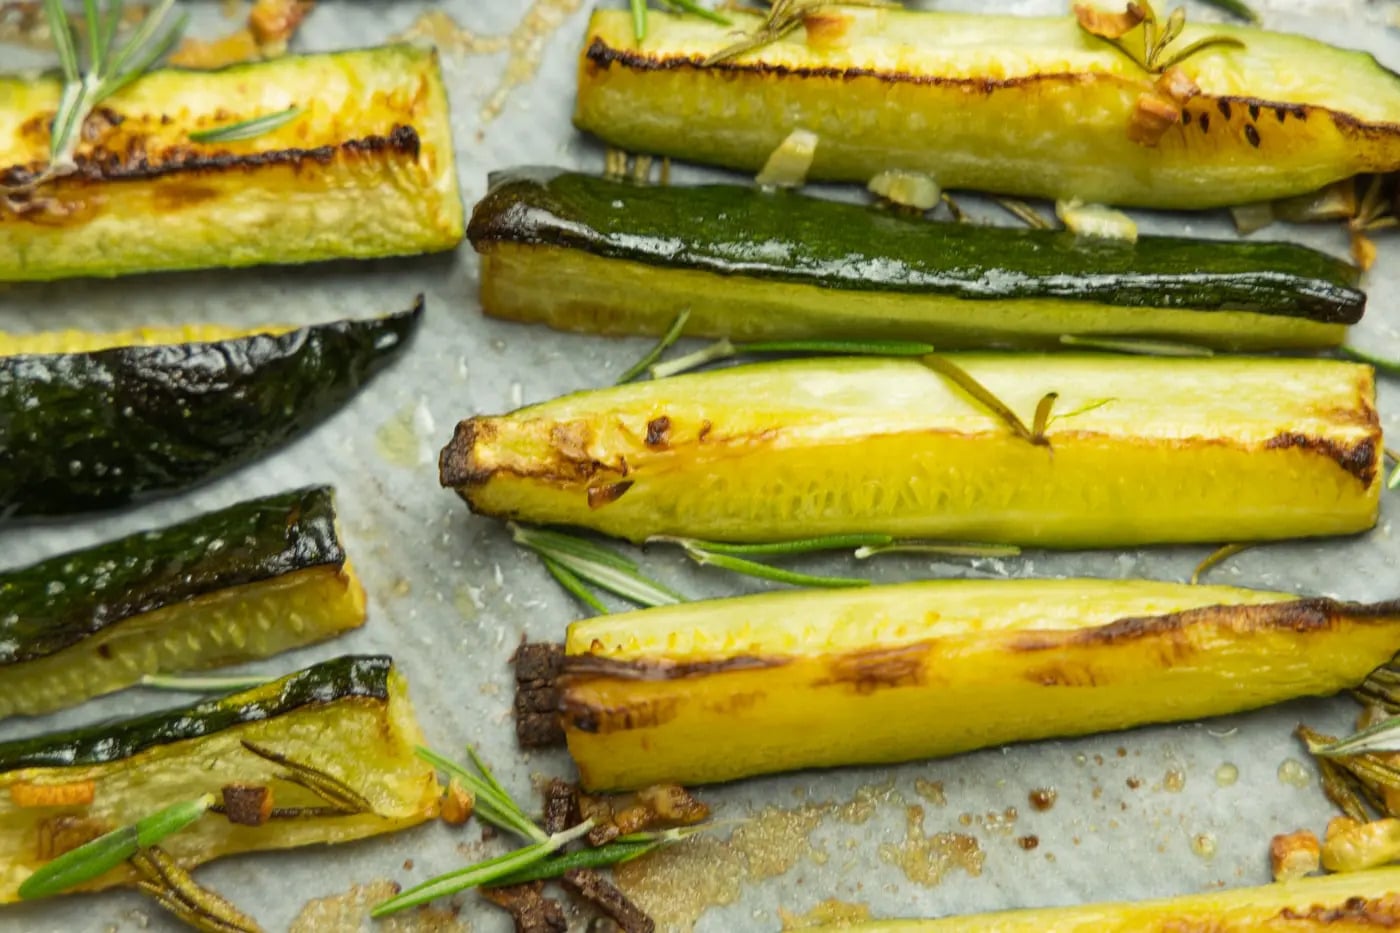 Tasty Vegetable Side Dishes - zucchini wedges